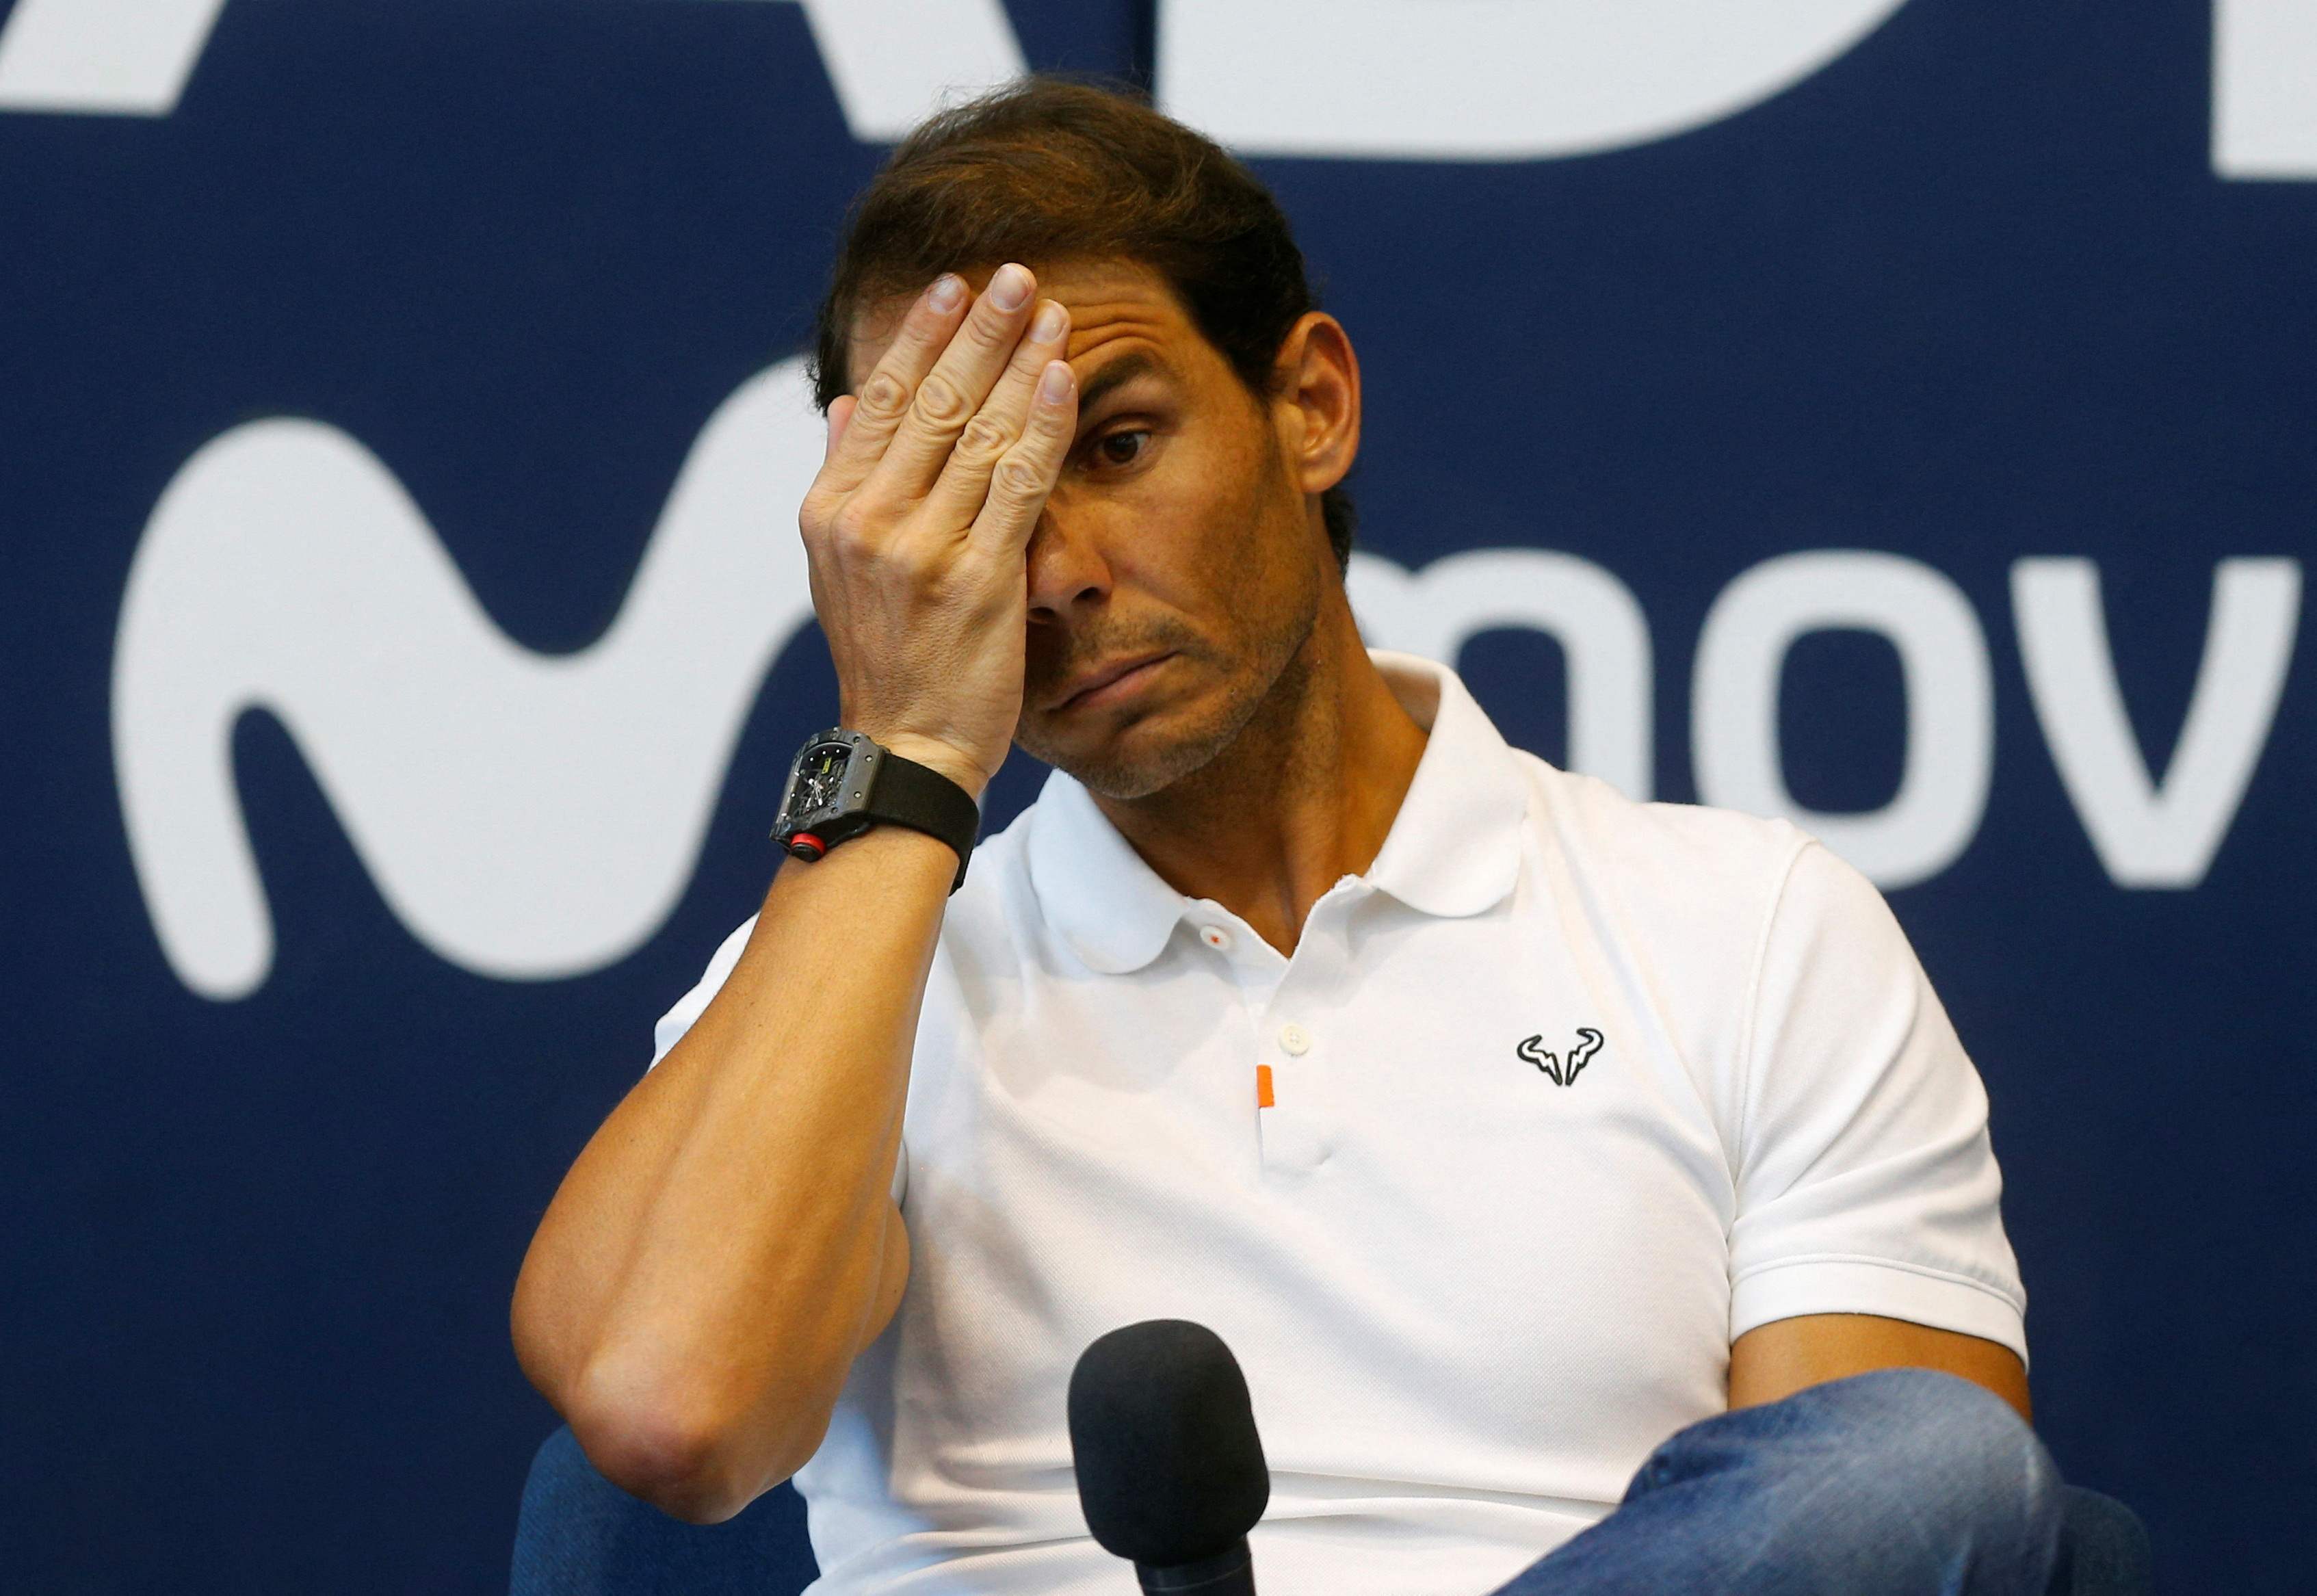 Nadal to miss Madrid Open after recovery setback Reuters